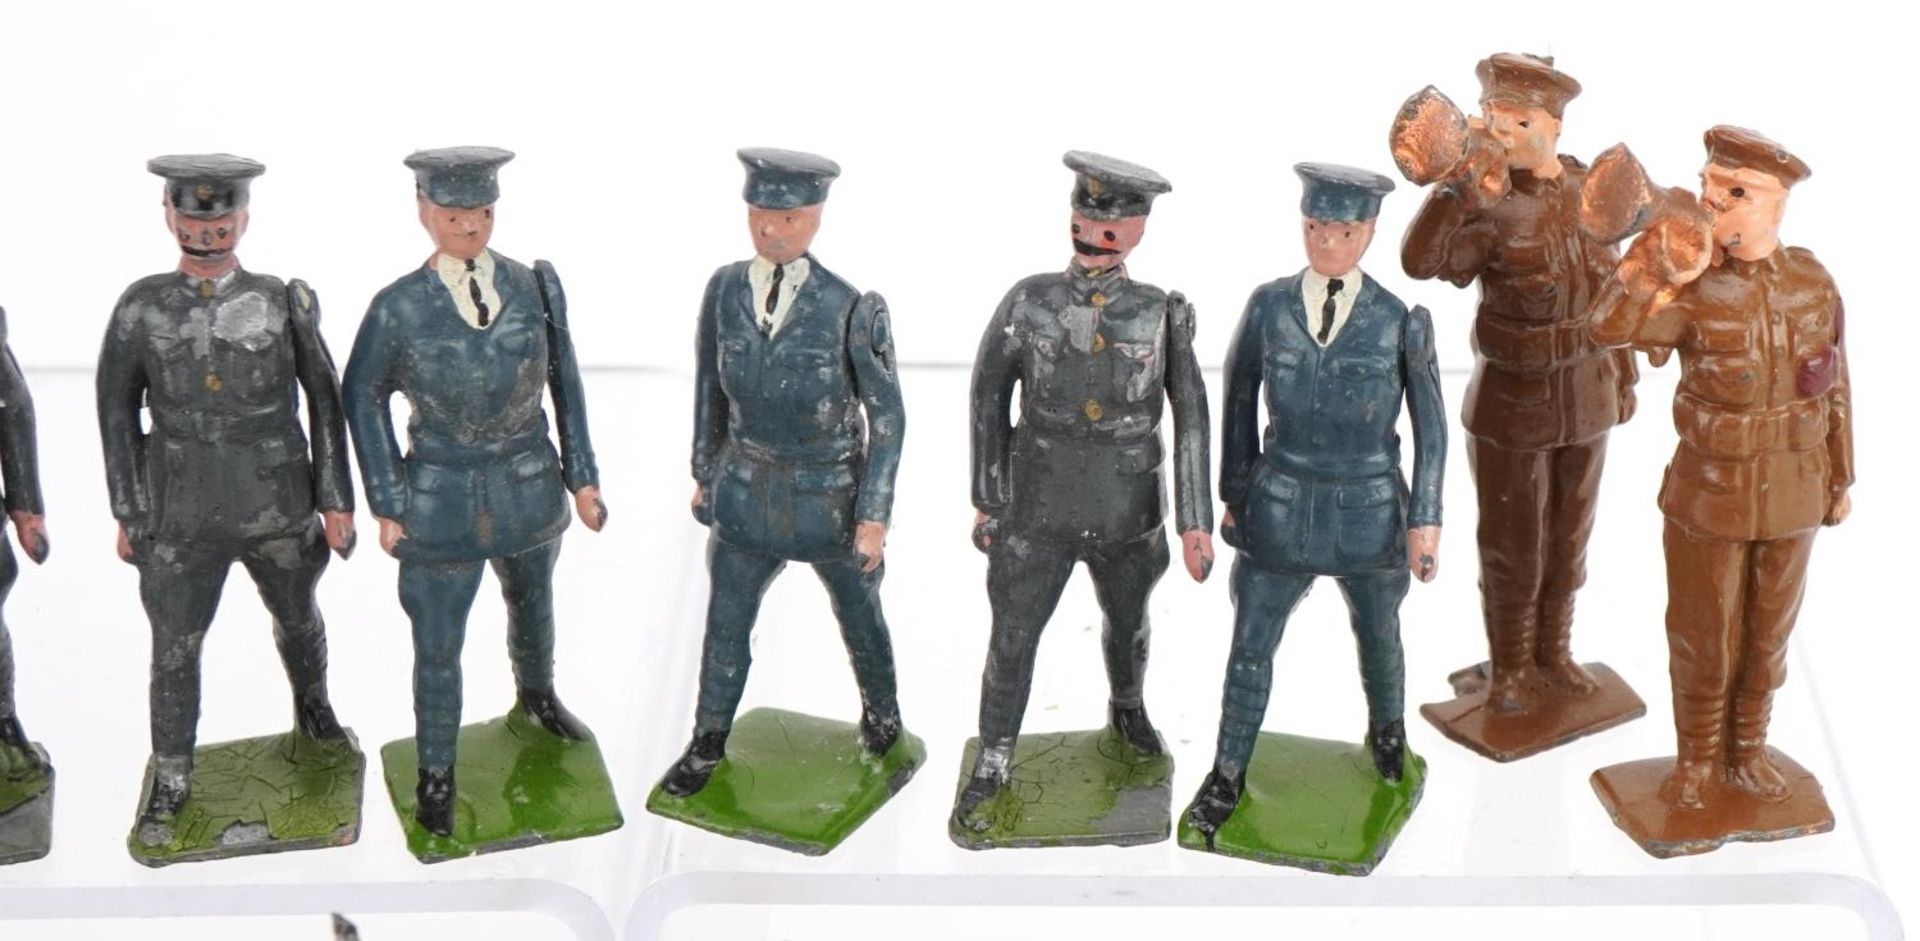 John Hill & Co and Britains hand painted lead soldiers including Seaforth Highlanders, with paper - Image 4 of 9